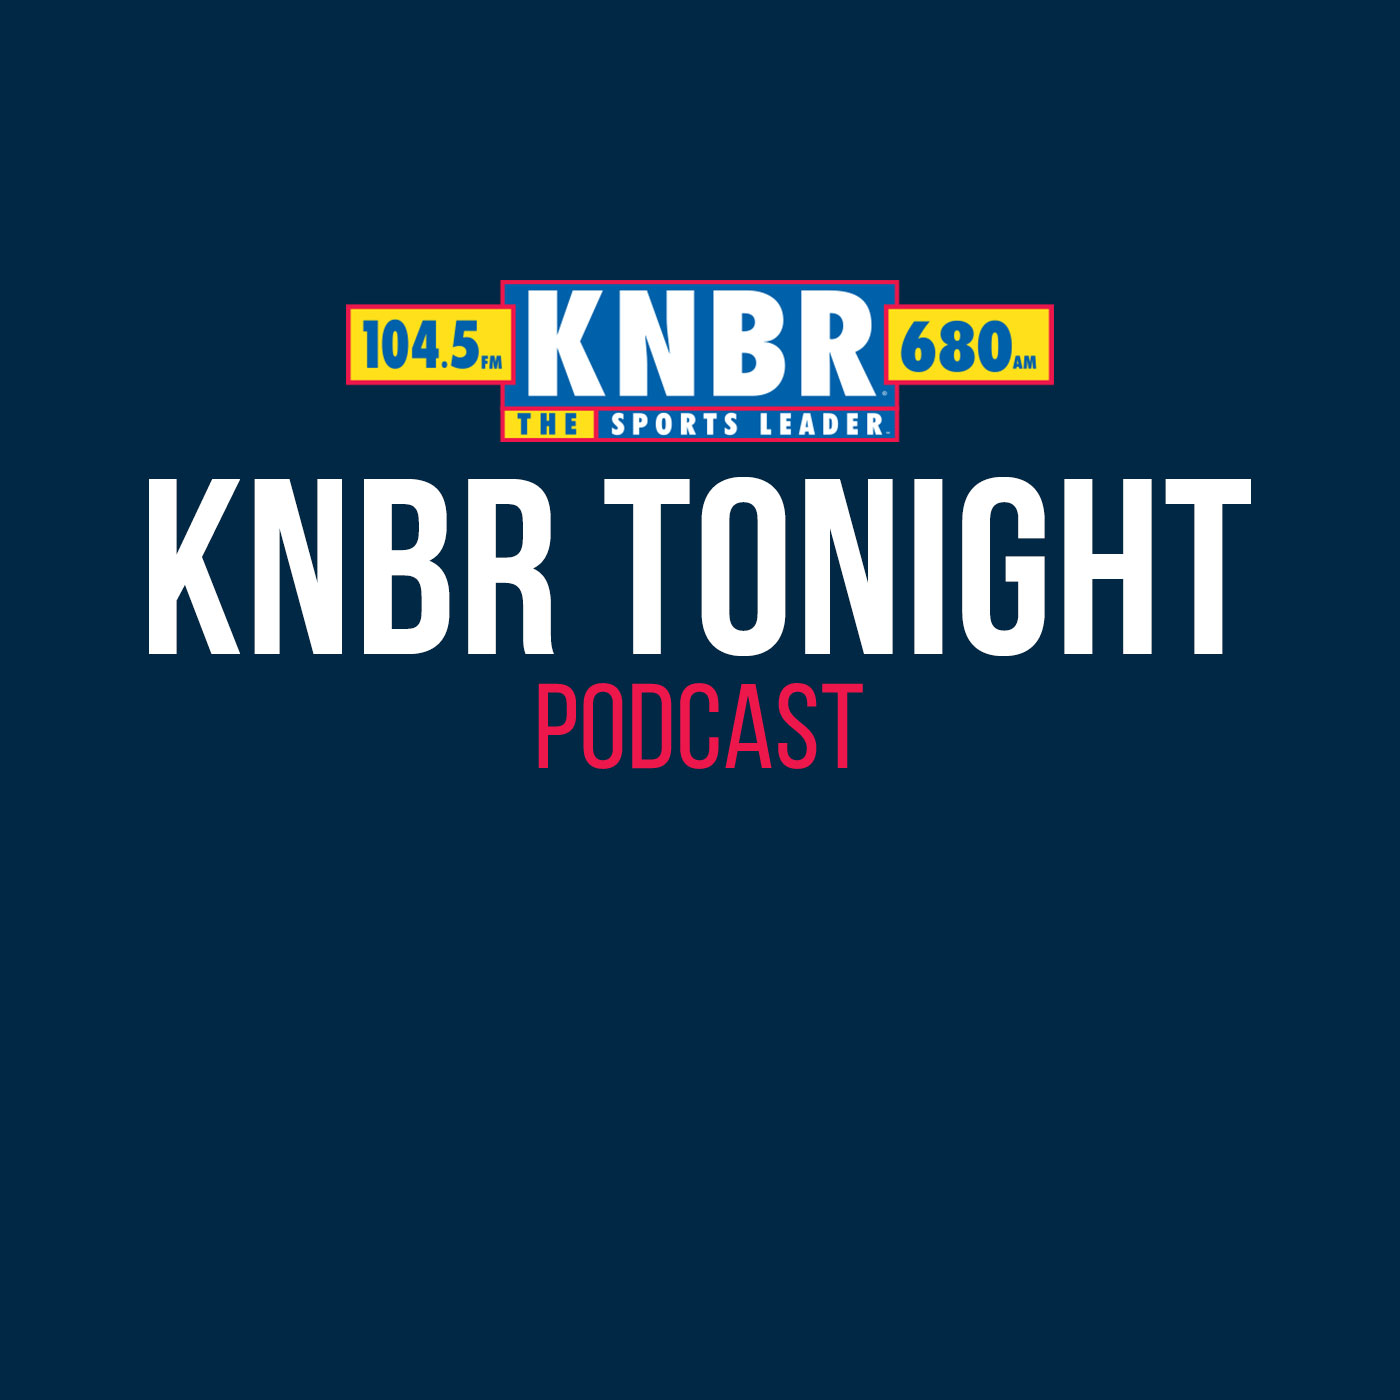 6-16 Scott Spinelli joins KNBR Tonight with FP during halftime of Game 6 of the NBA Finals